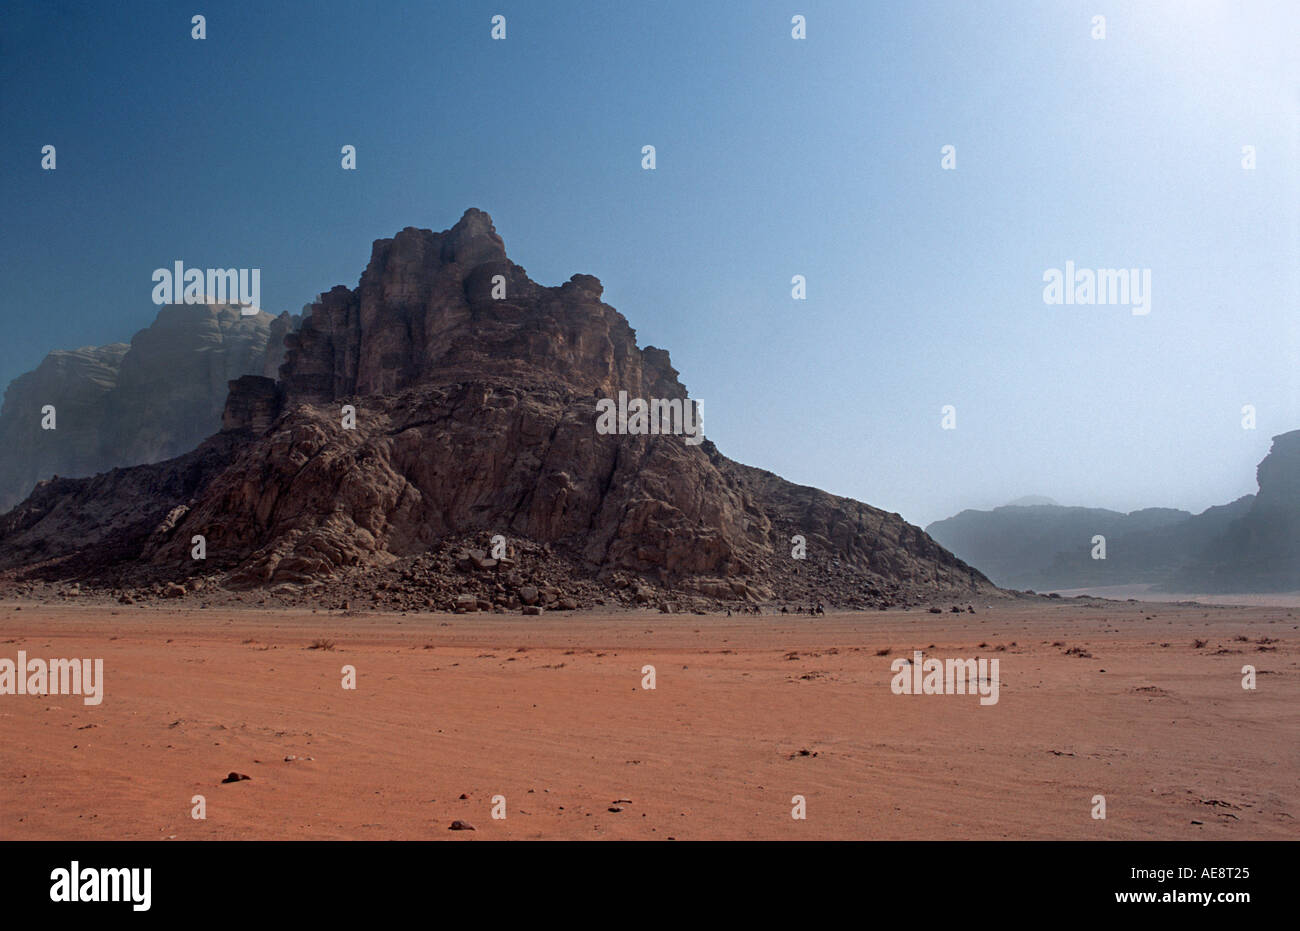 Red sand floor of desert with rocky outcrops called Jebels in the distance Wadi Rum Jordan Travelling on camels in the desert Stock Photo